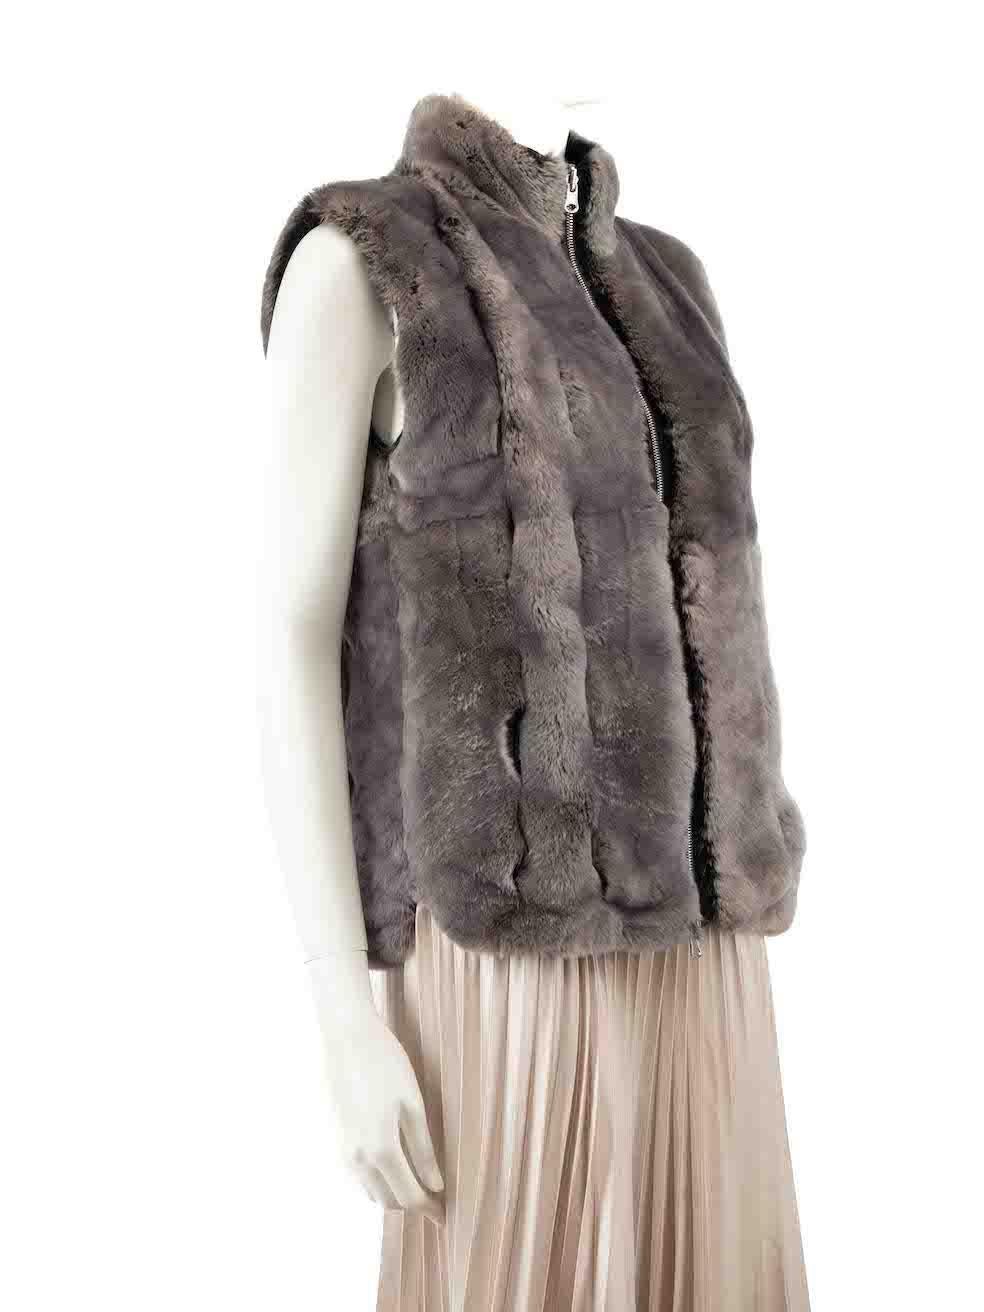 CONDITION is Very good. Hardly any visible wear to gilet is evident on this used N. PEAL designer resale item.
 
 
 
 Details
 
 
 Grey
 
 Fur and cashmere
 
 Reversible gilet
 
 Quilted cashmere
 
 2x Pockets on quilted cashmere side
 
 Zip